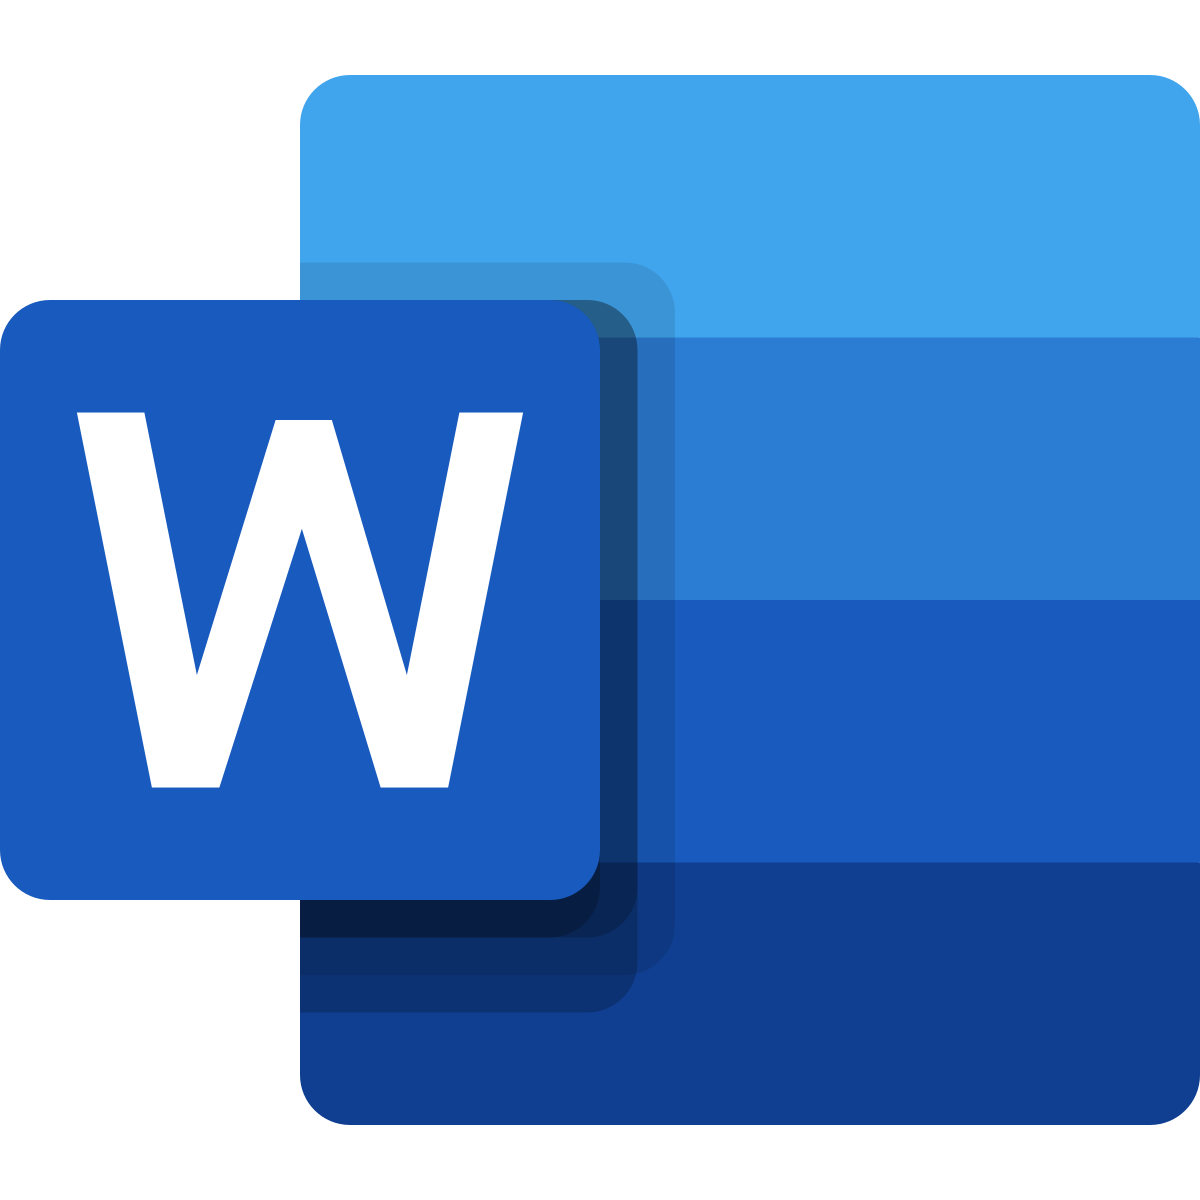 Image logo for Word.